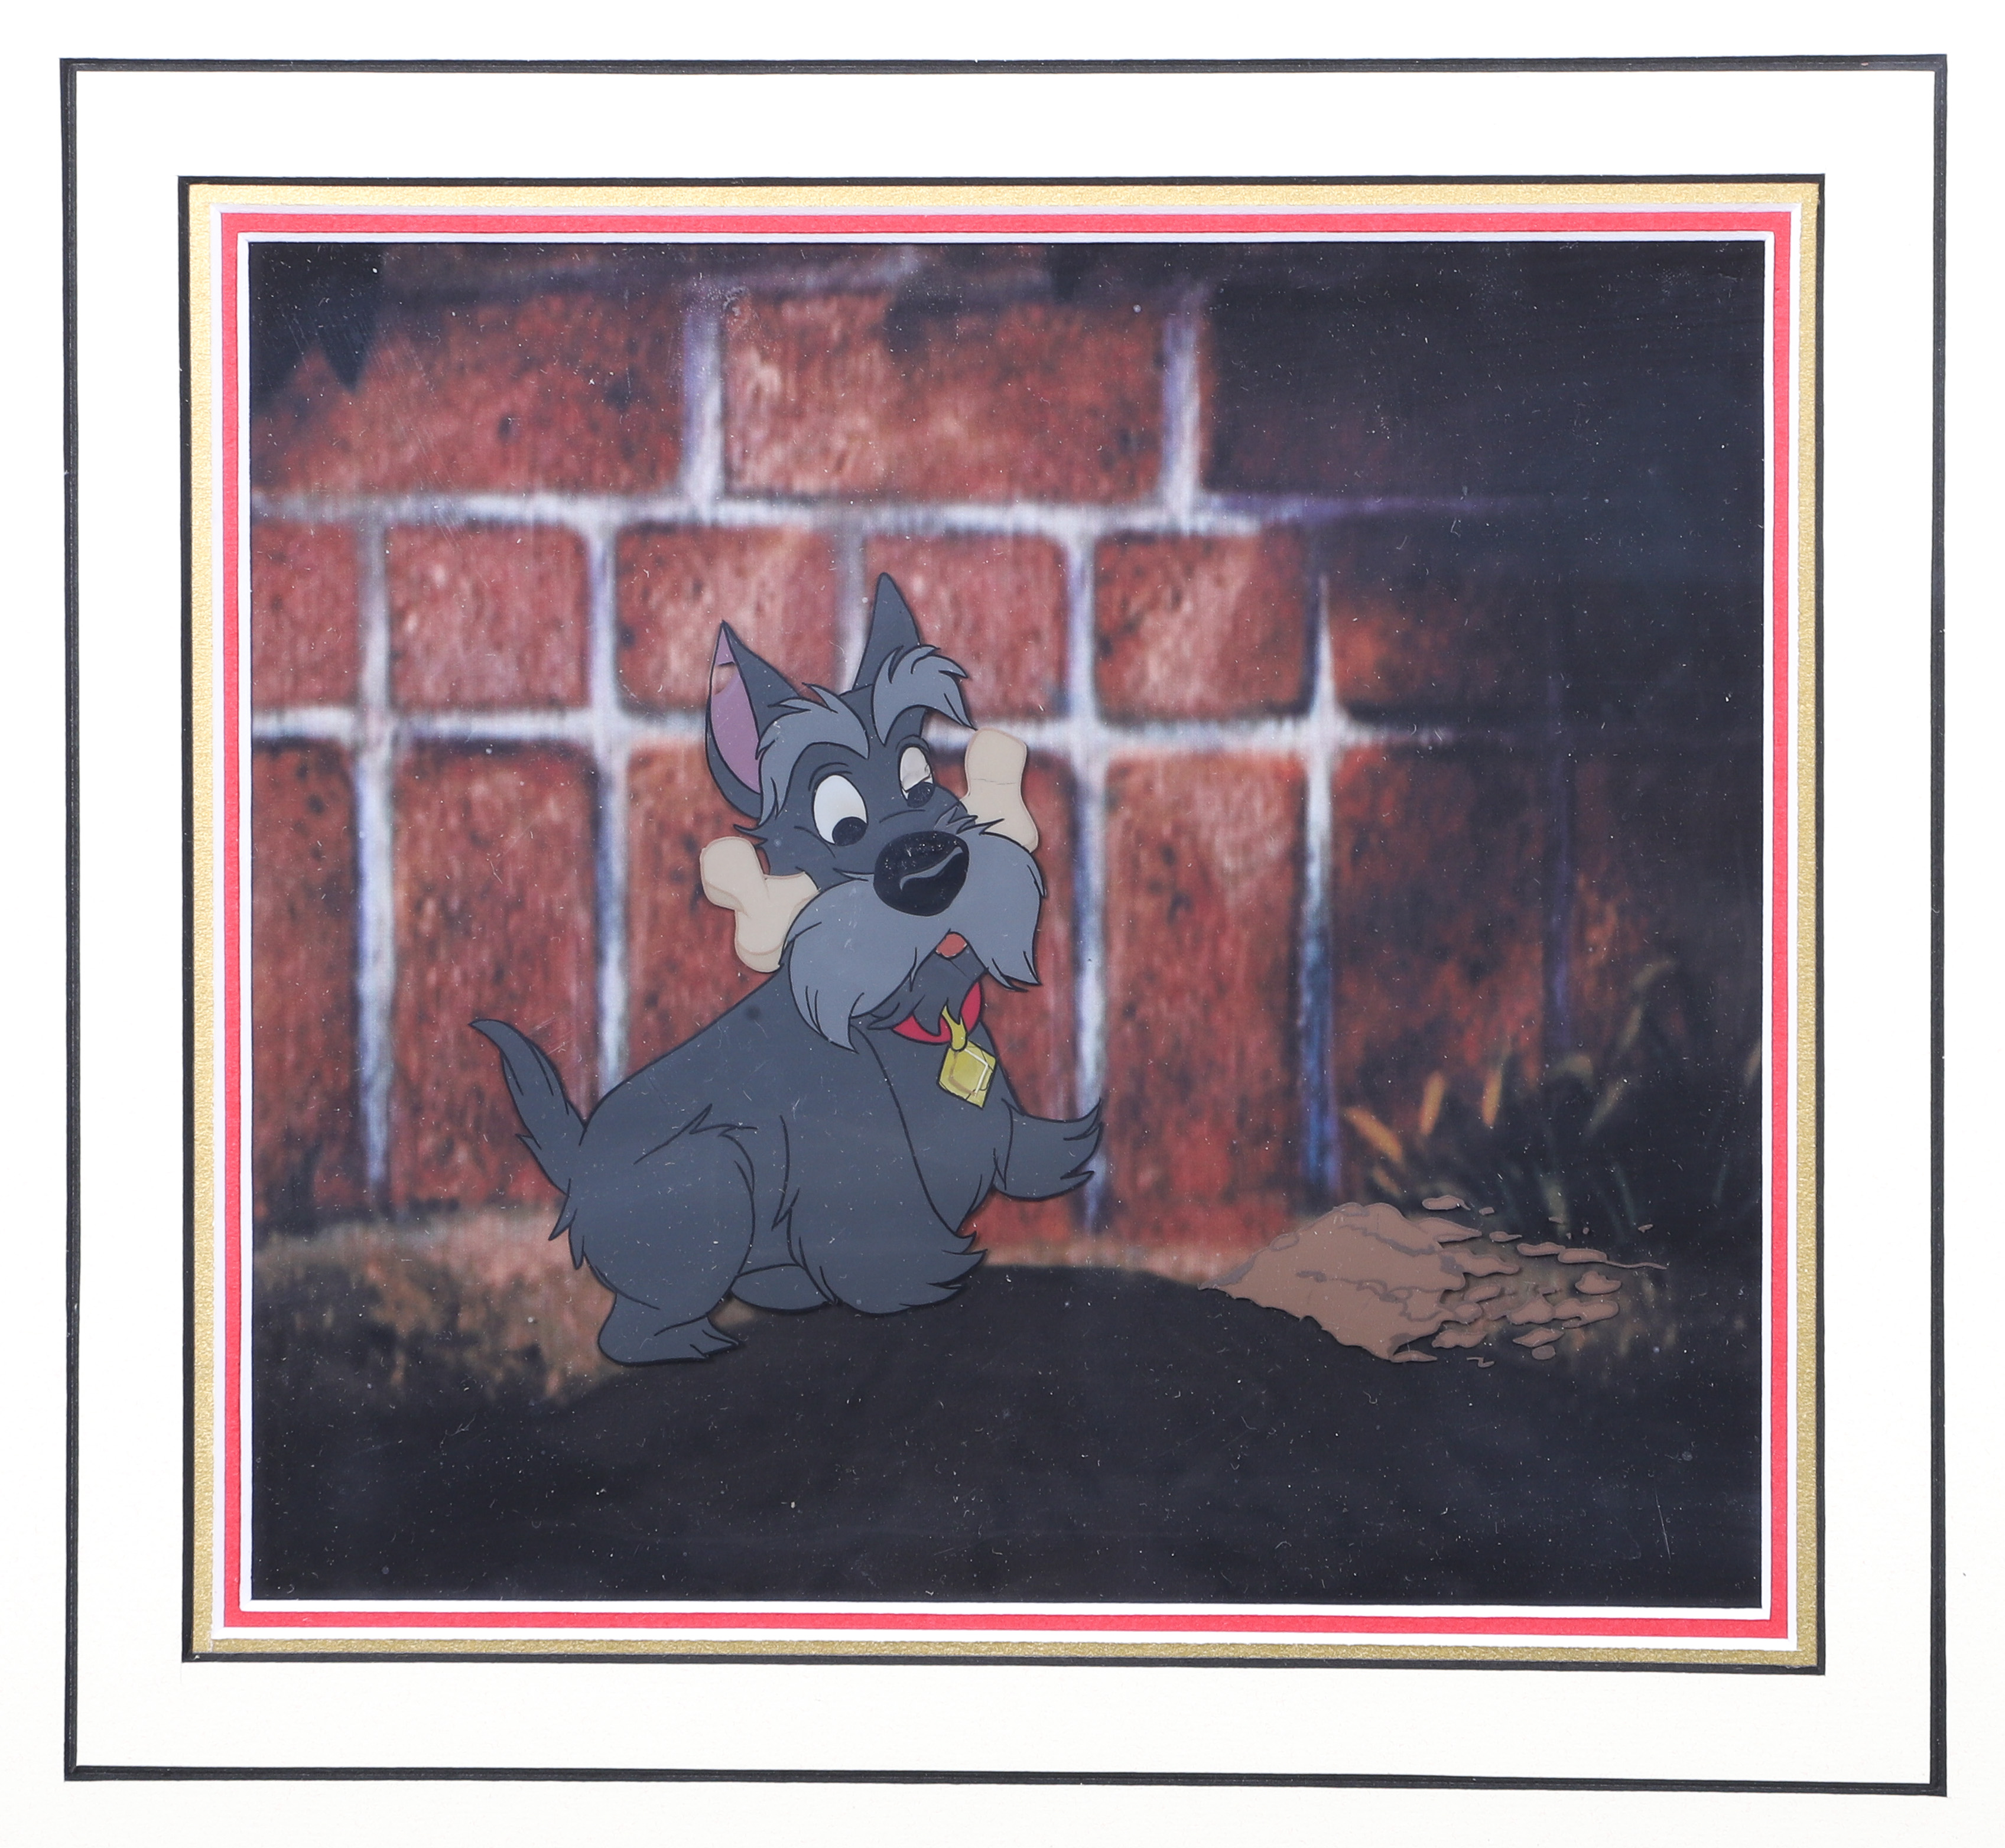 Lady and the Tramp production cel 2e1ca9